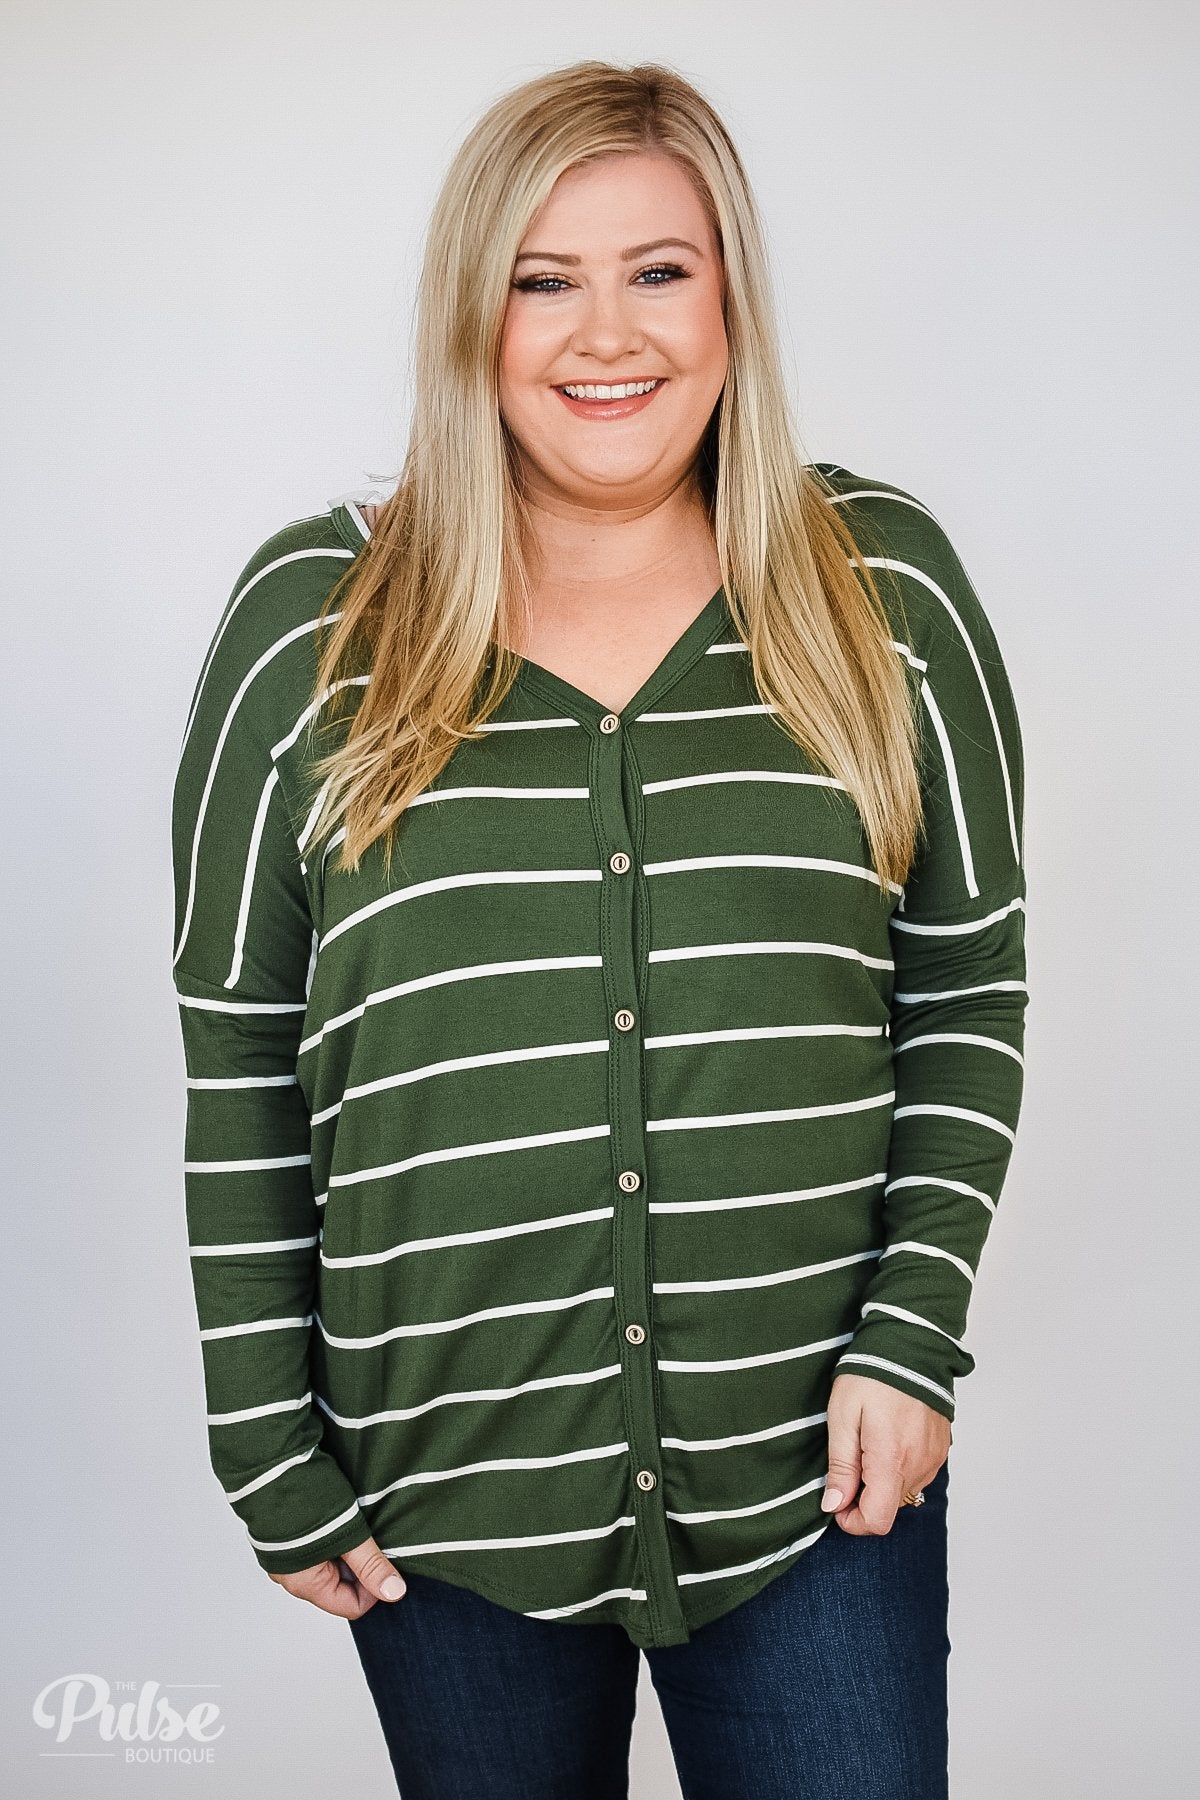 Caught Up to You Long Sleeve Striped Top- Green